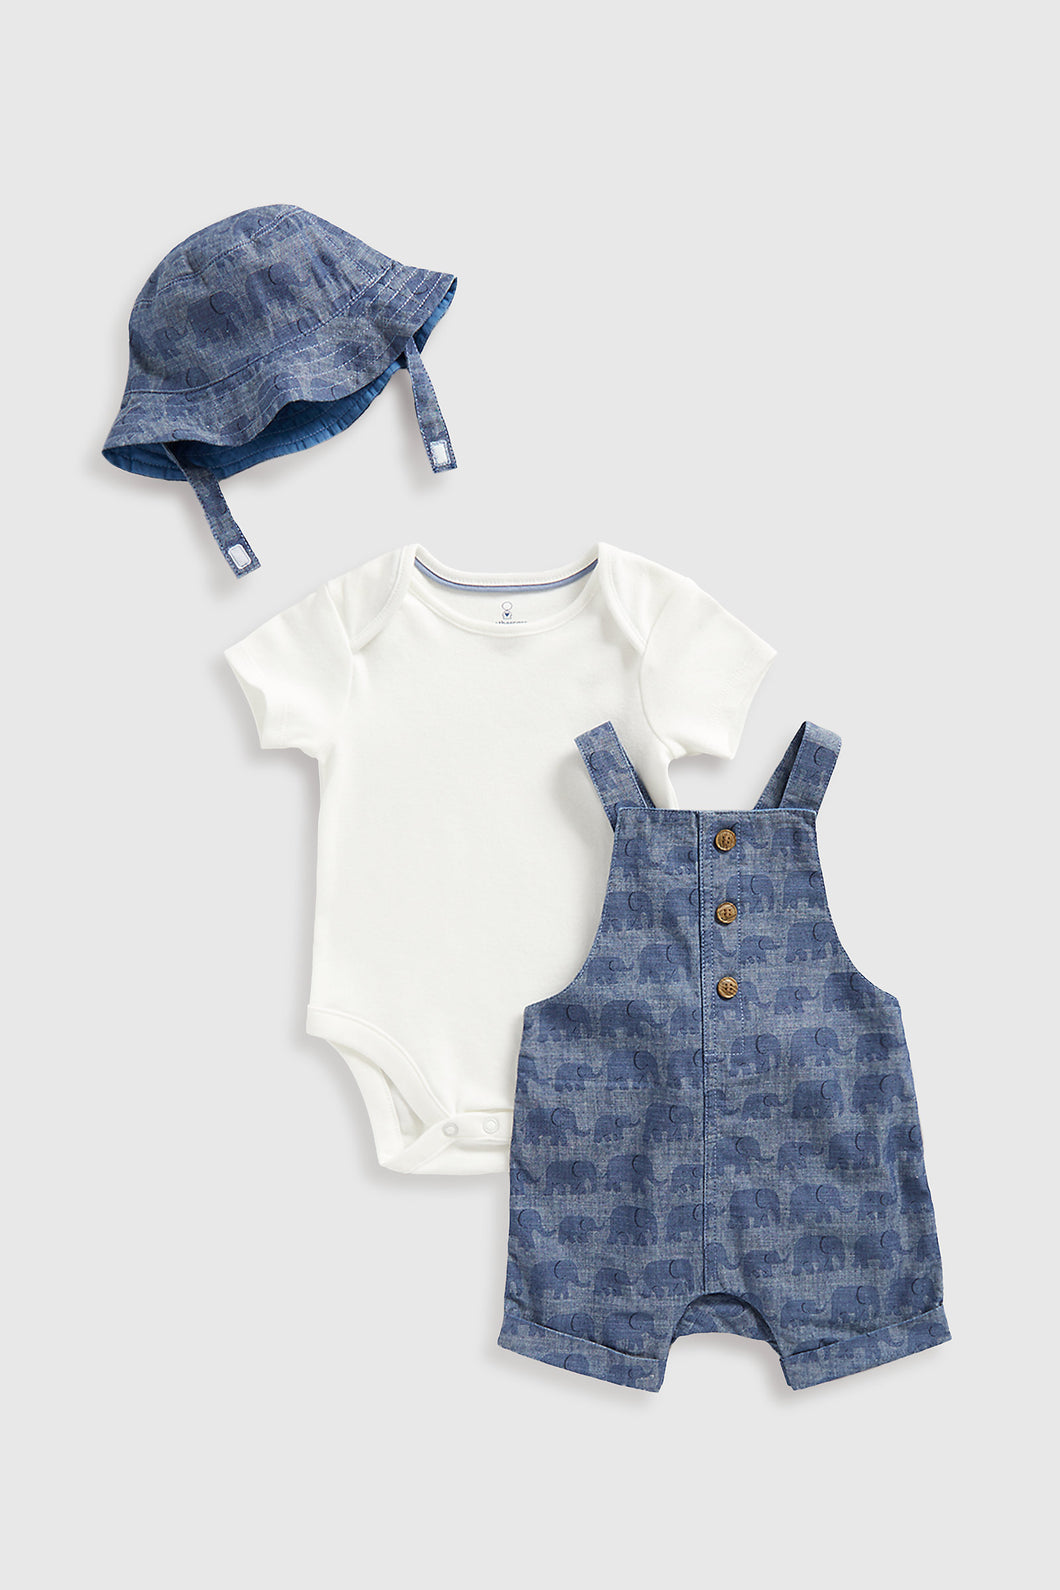 Mothercare Chambray Bibshorts, Bodysuit And Hat Set